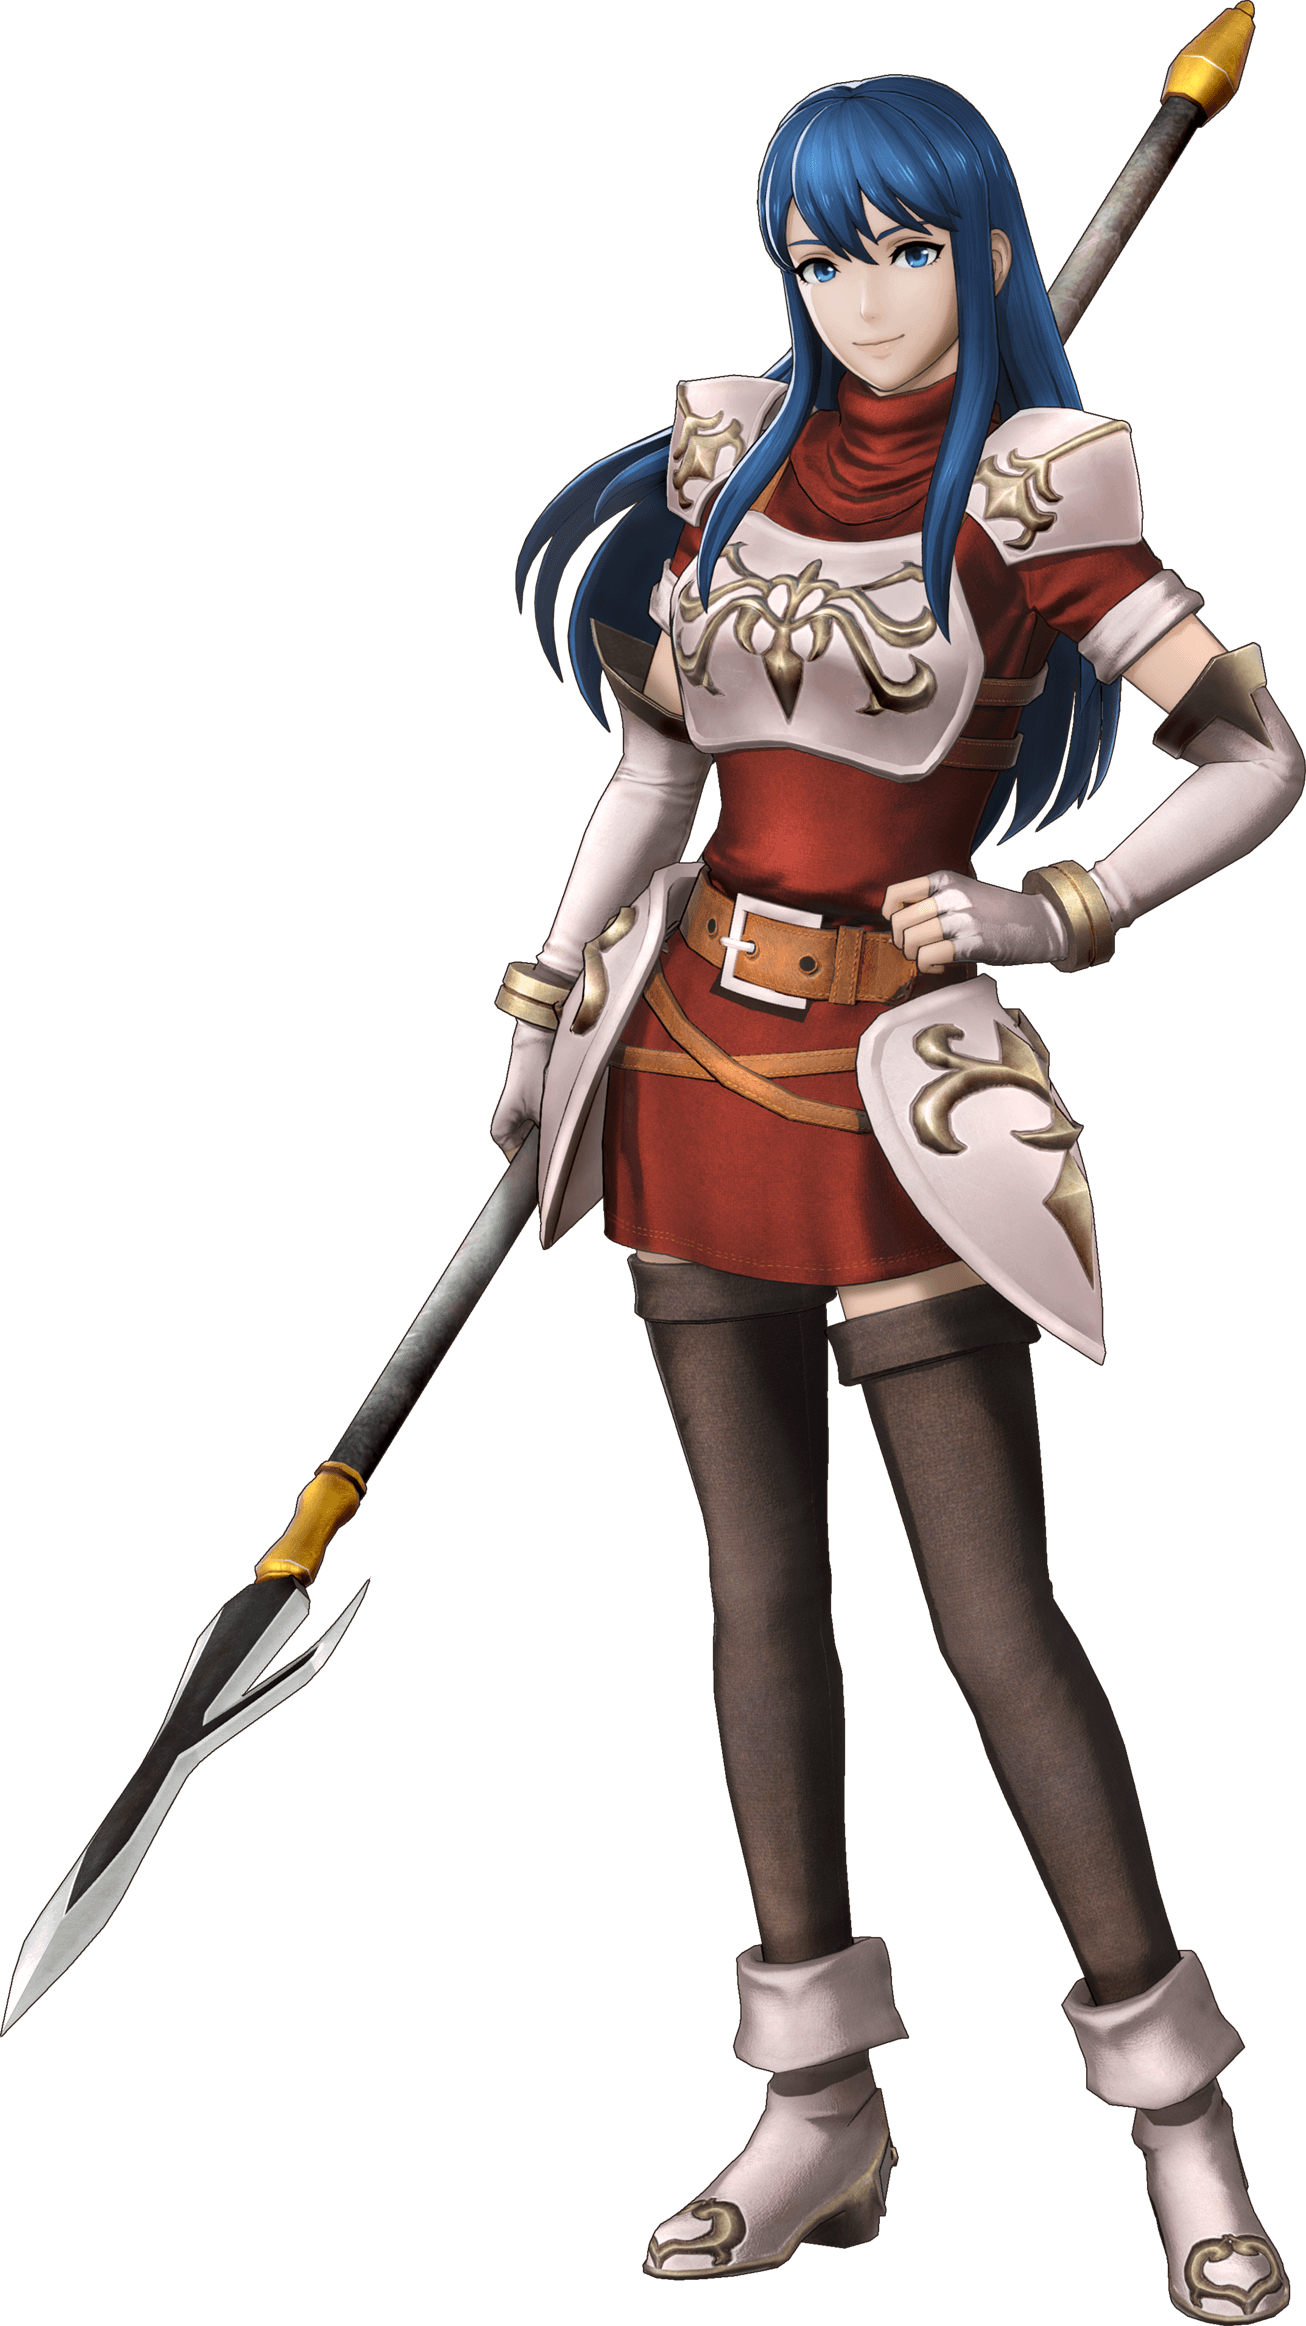 Fire Emblem Warriors: two new characters revealed (Caeda 